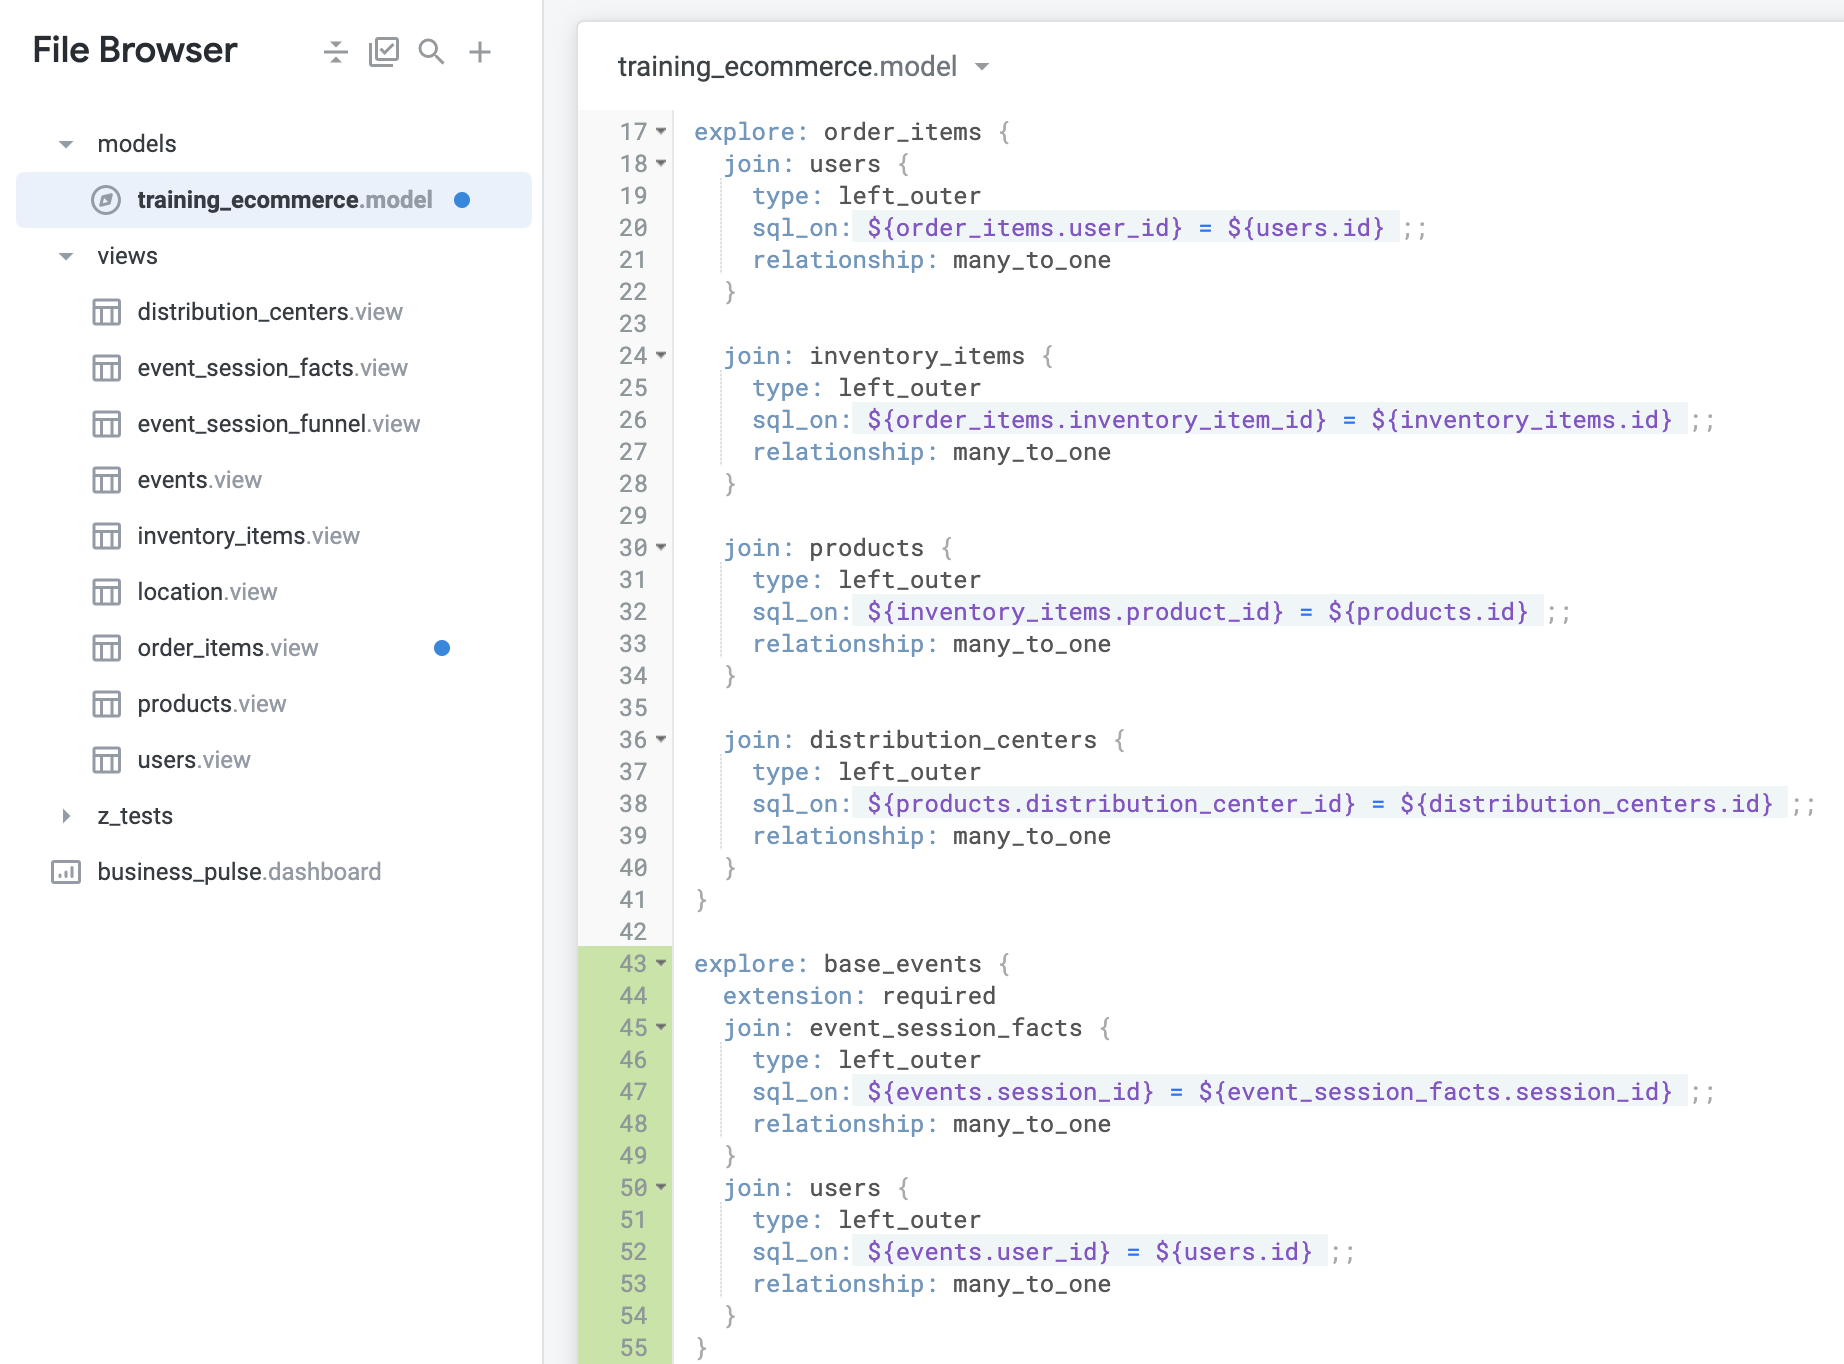 The open training.ecommerce.model file with the added lines of base_events explore code highlighted